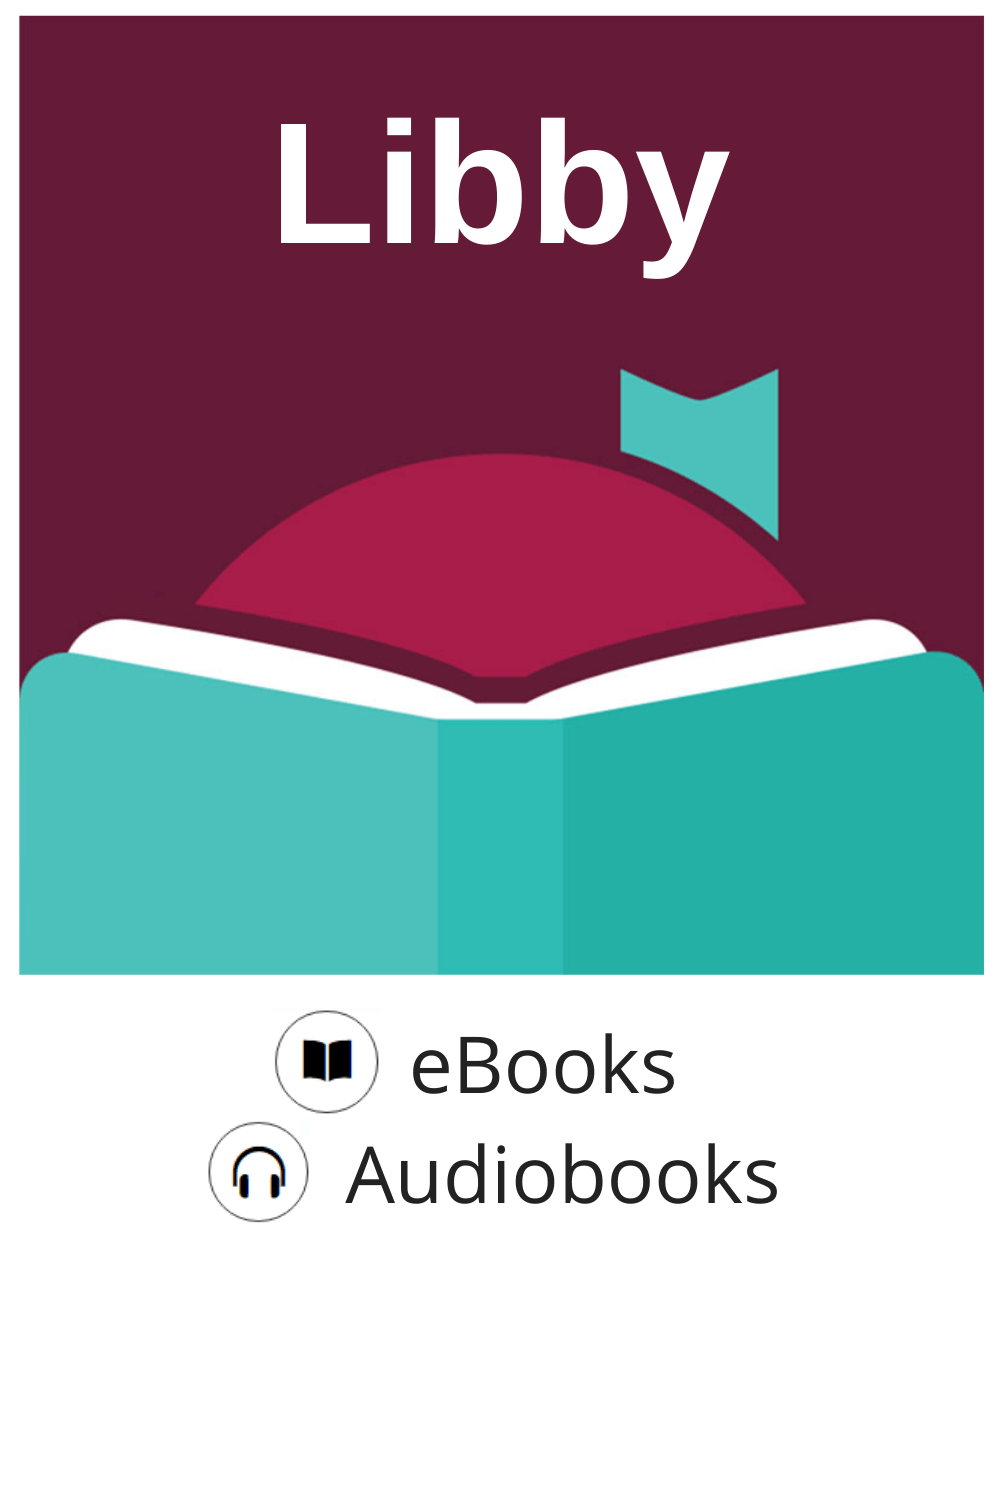 OverDrive - Our most popular service for eBooks and digital Audiobooks. OverDrive offers our largest collection of digital books, including the most recent titles and best sellers.